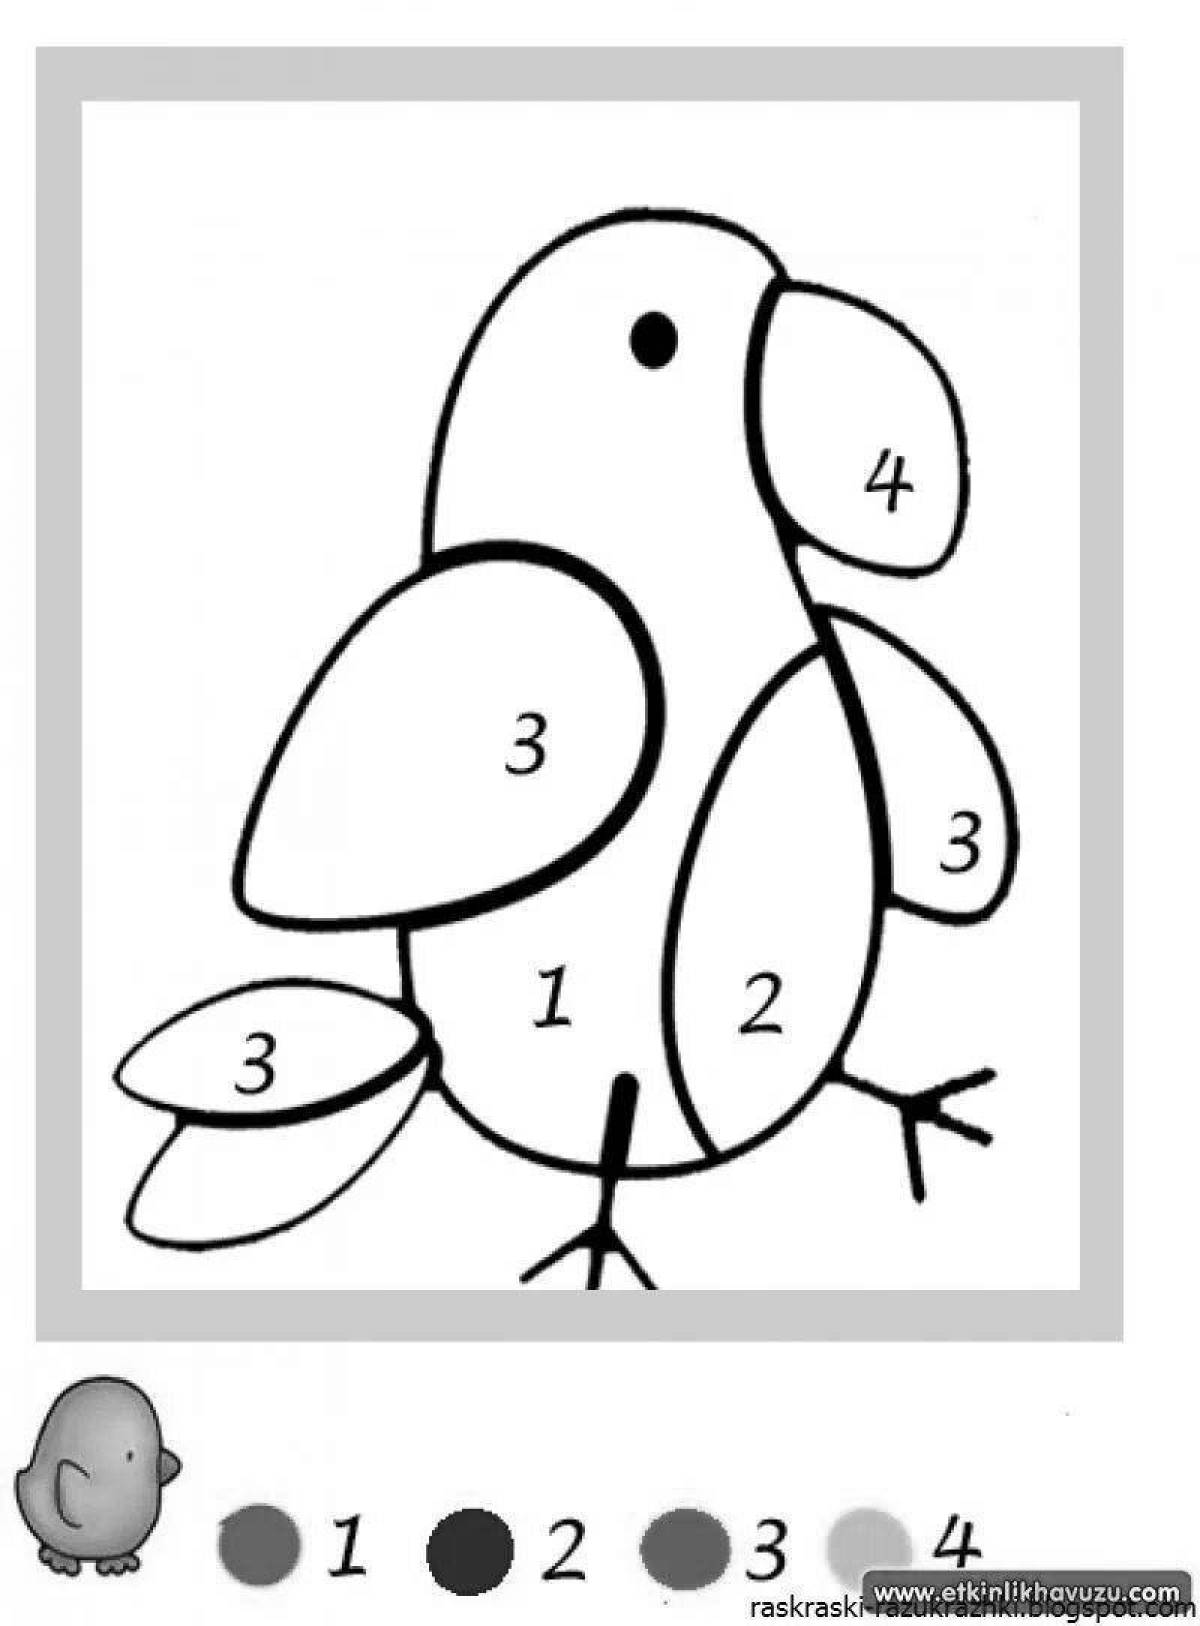 Innovative math coloring book for 3-4 year olds